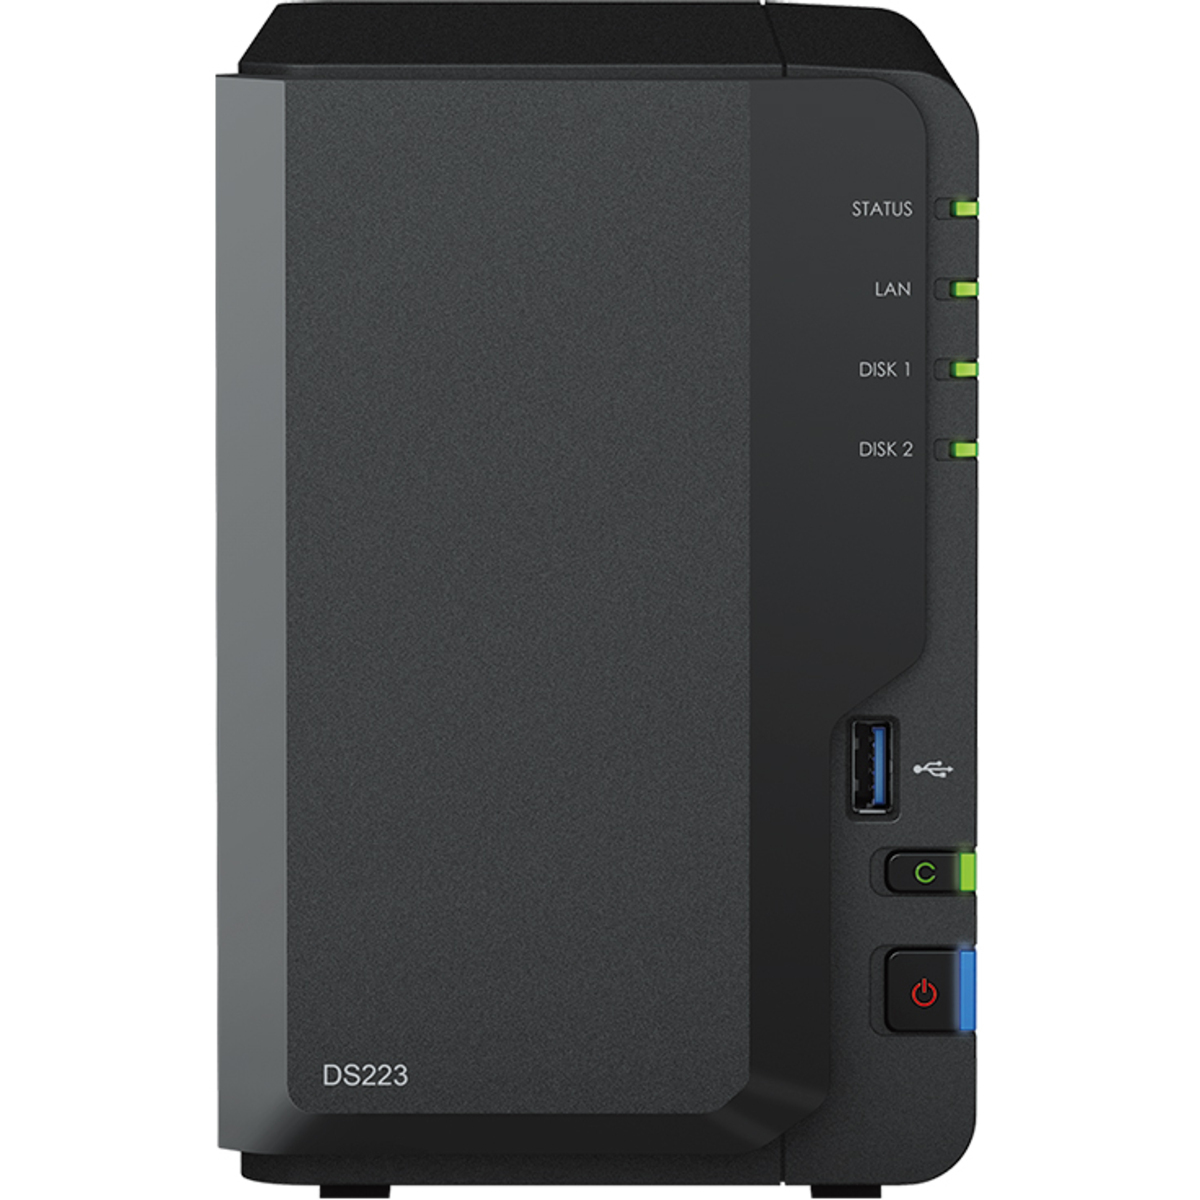 Synology DiskStation DS223 20tb 2-Bay Desktop Personal / Basic Home / Small Office NAS - Network Attached Storage Device 1x20tb Seagate EXOS X20 ST20000NM007D 3.5 7200rpm SATA 6Gb/s HDD ENTERPRISE Class Drives Installed - Burn-In Tested DiskStation DS223